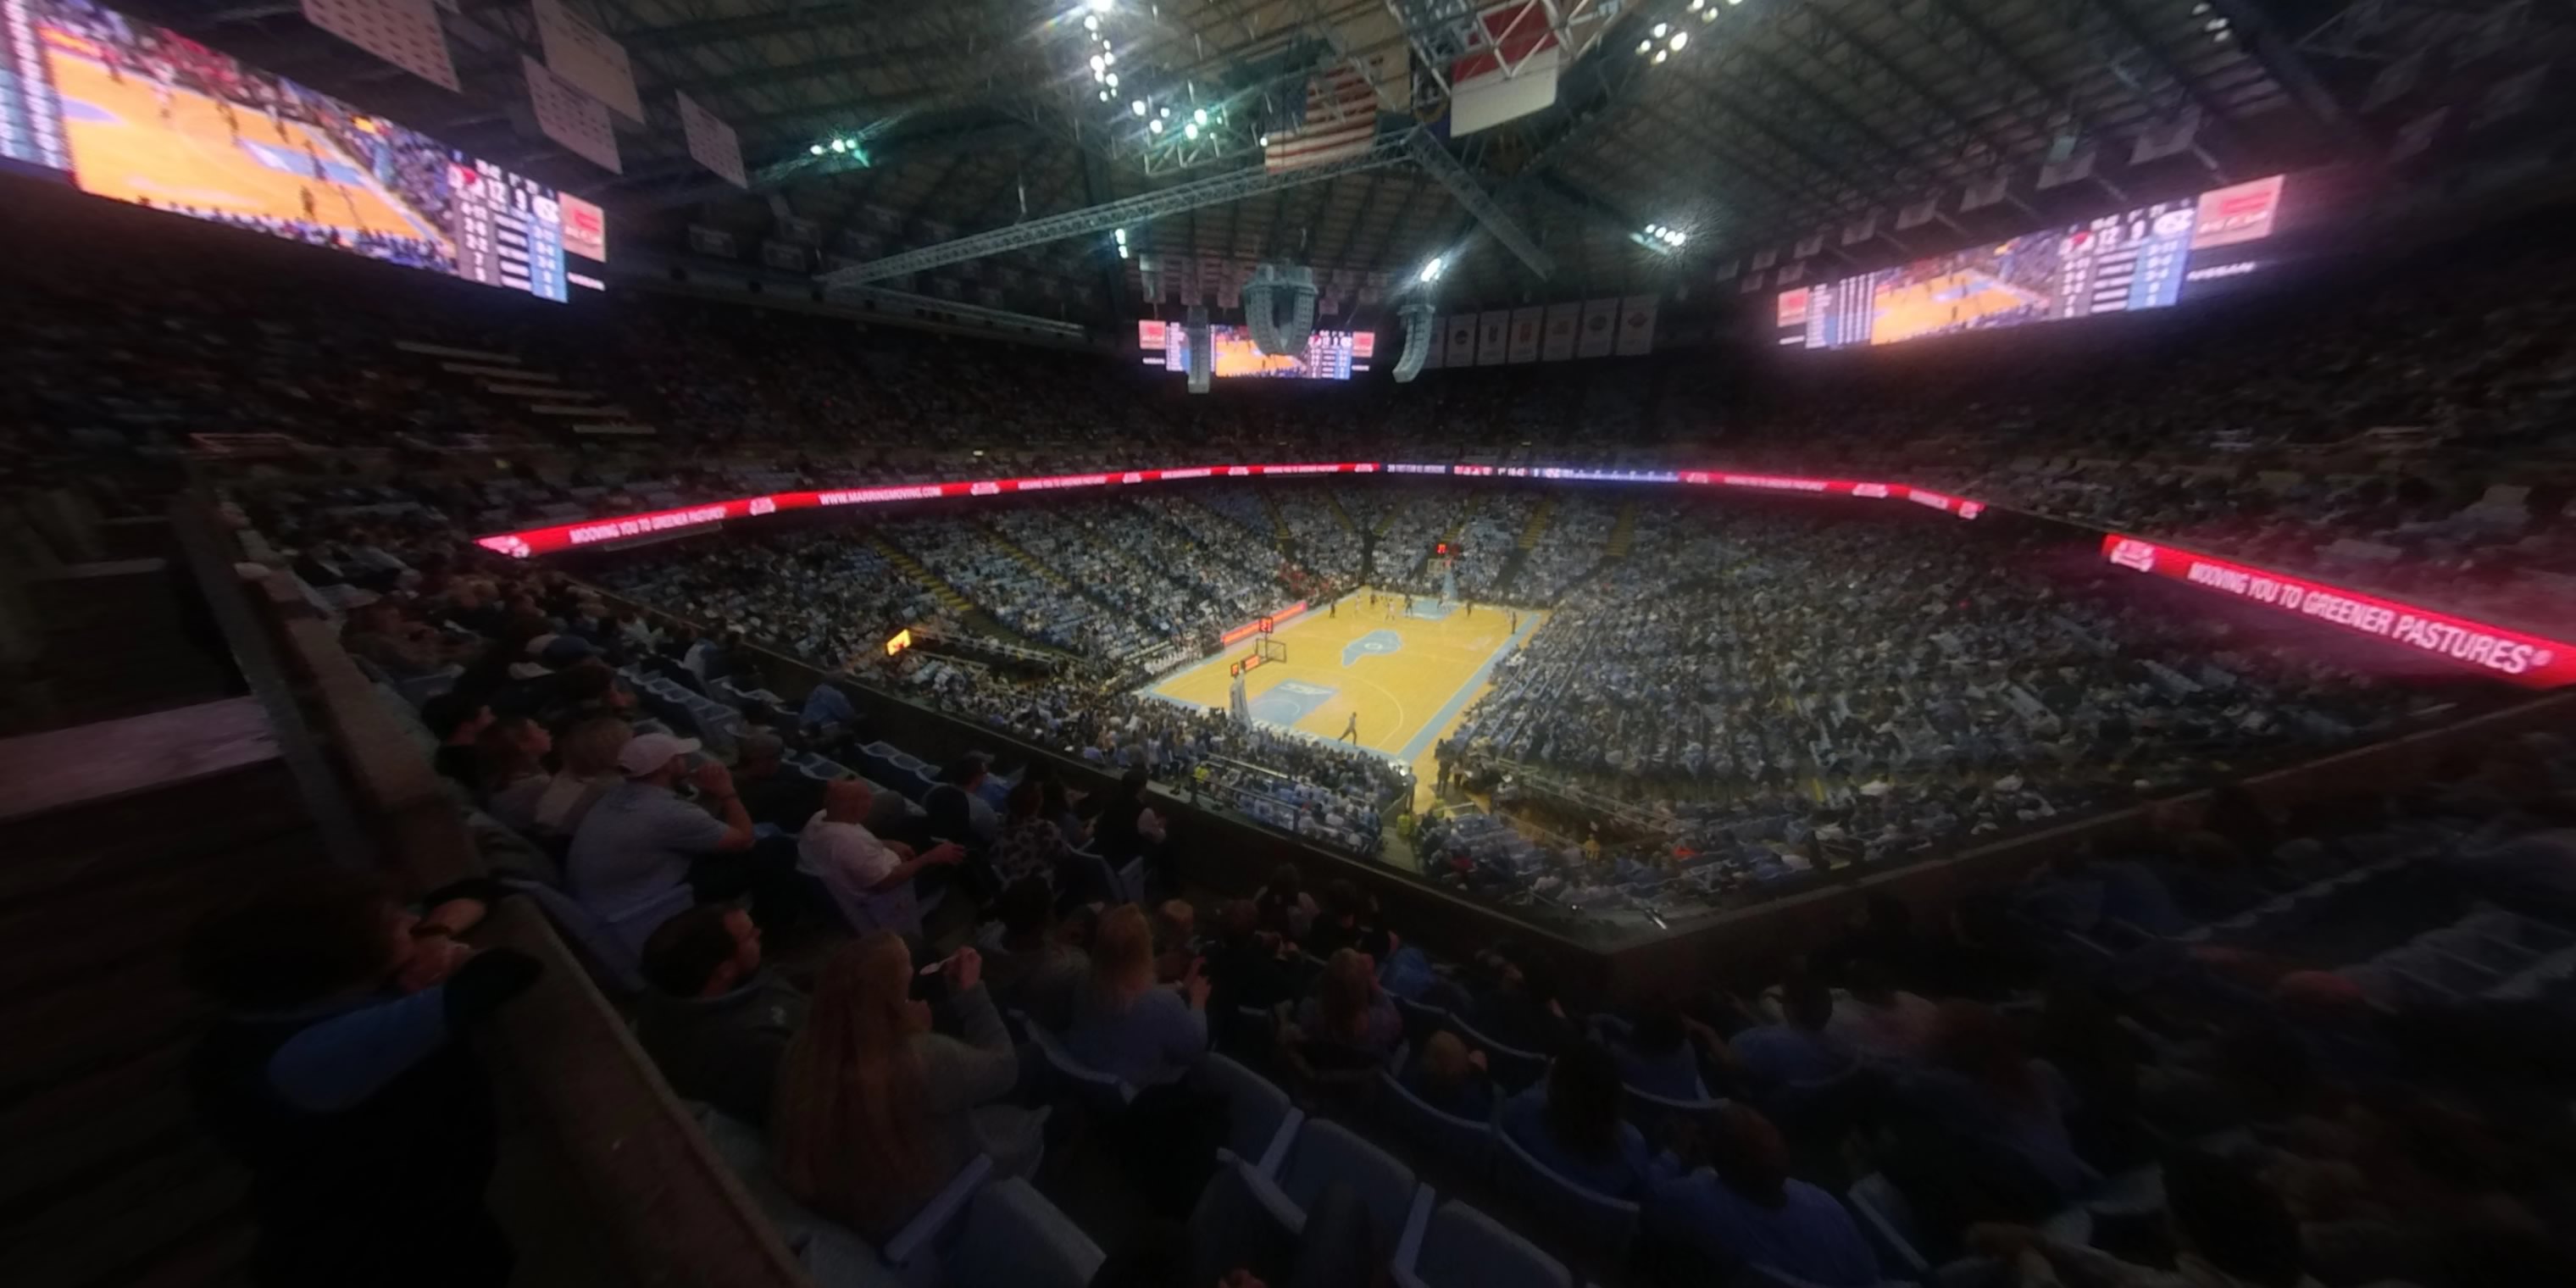 section 219 panoramic seat view  - dean smith center